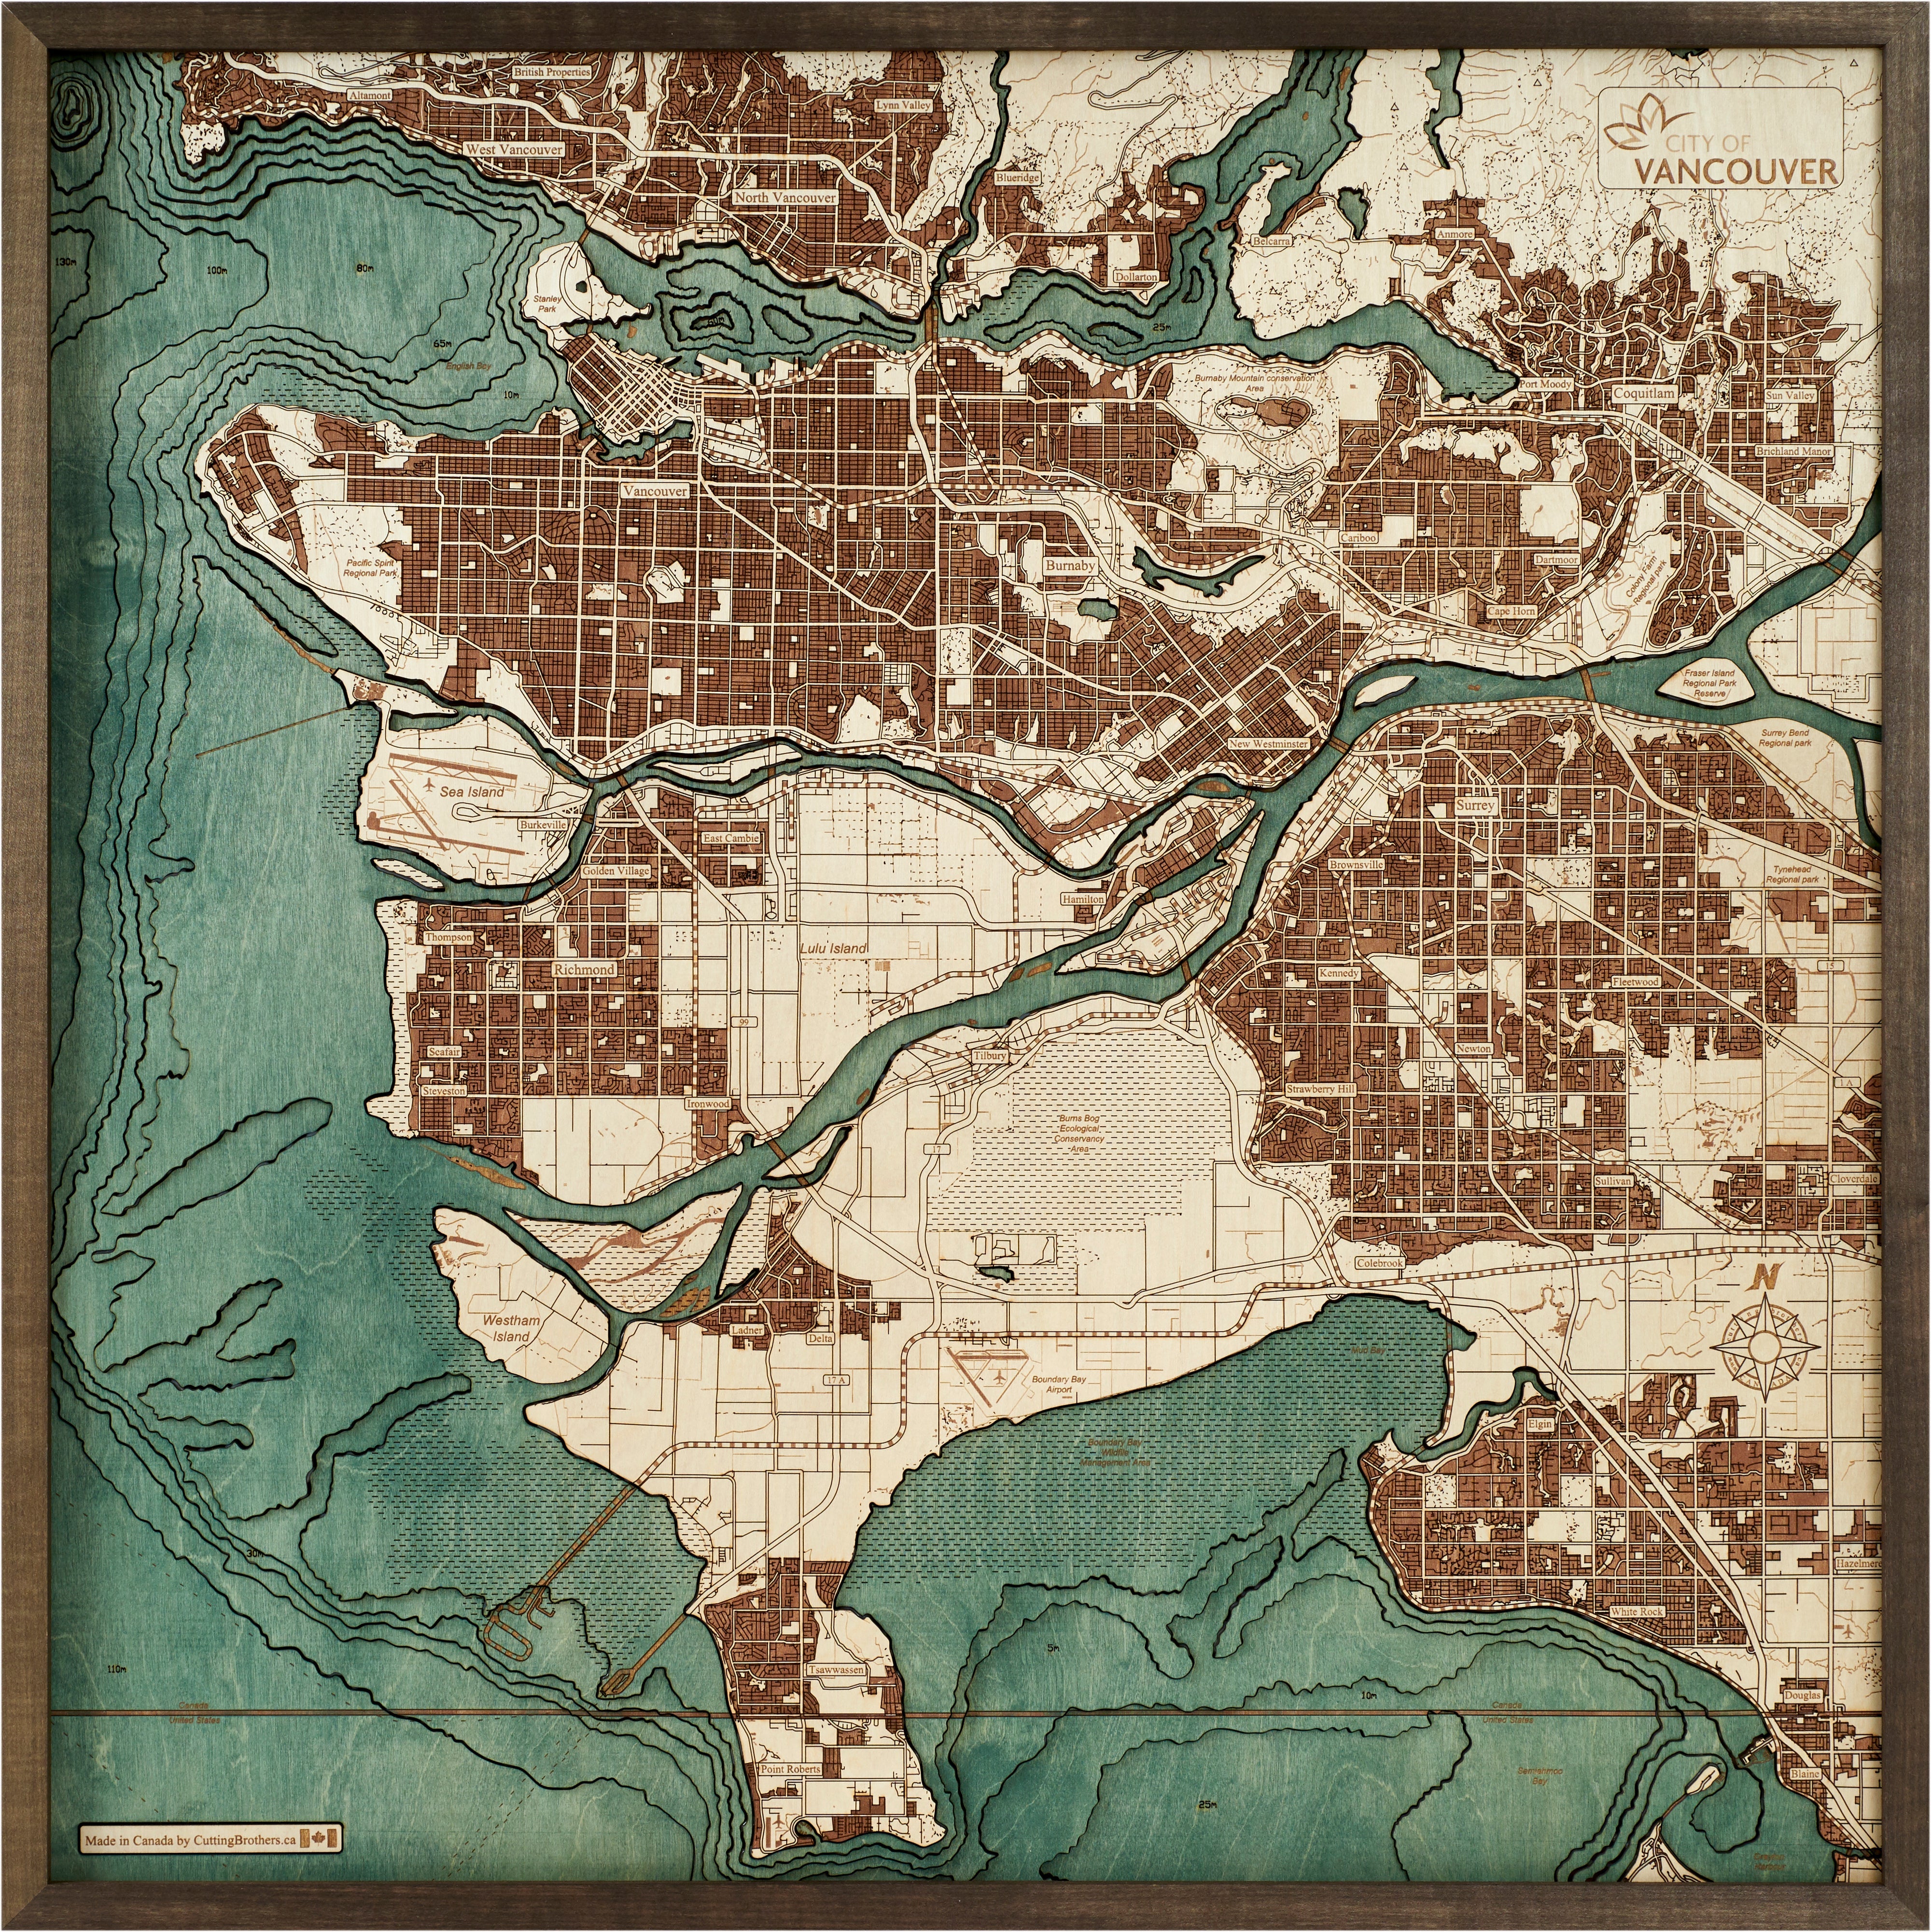 VANCOUVER 3D WOODEN WALL MAP - Version L